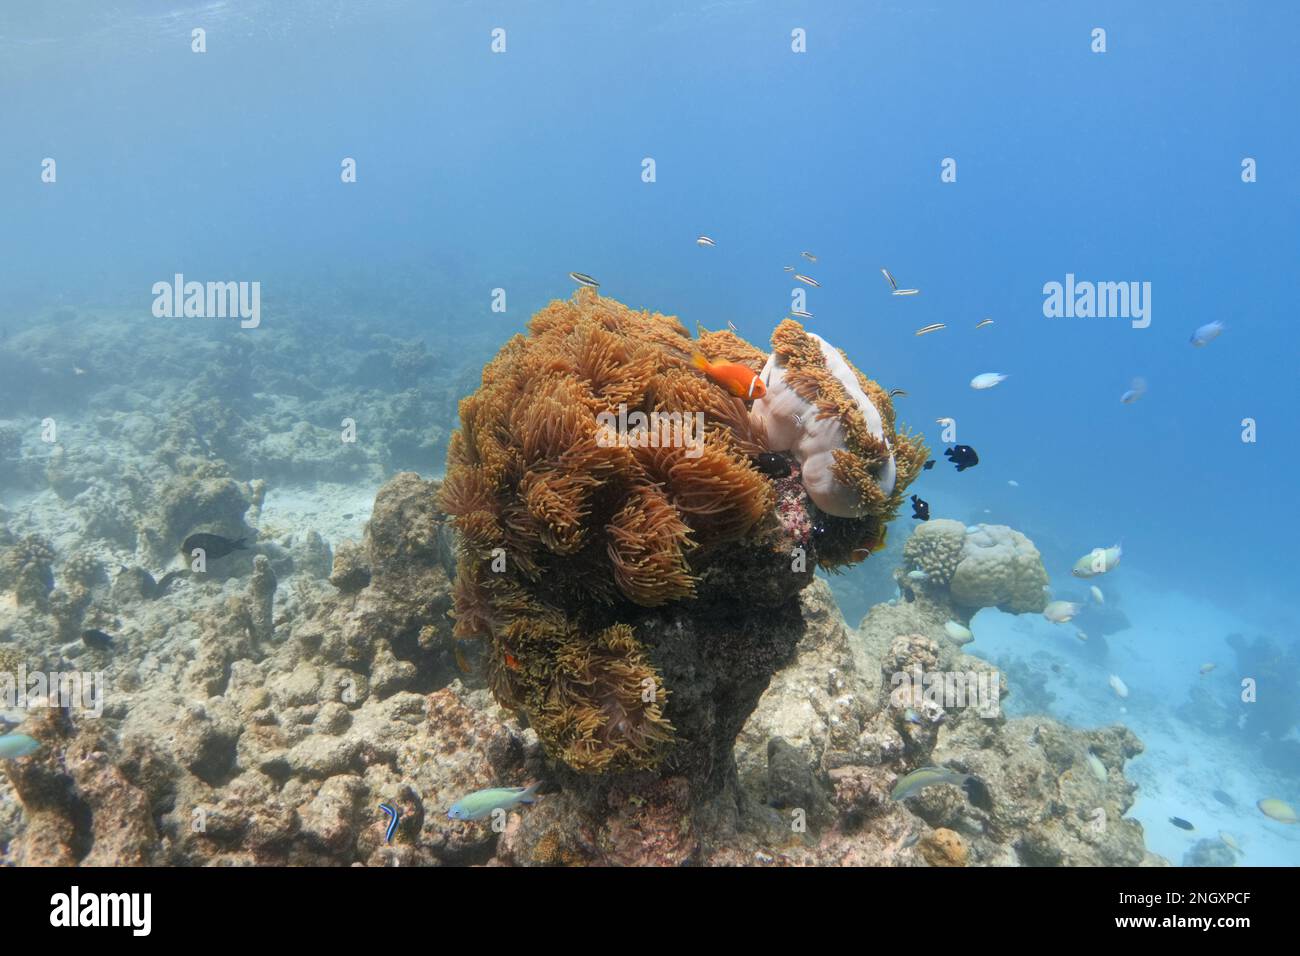 Colorful sea anemones on bleached coral reef. Effect of global warming Stock Photo